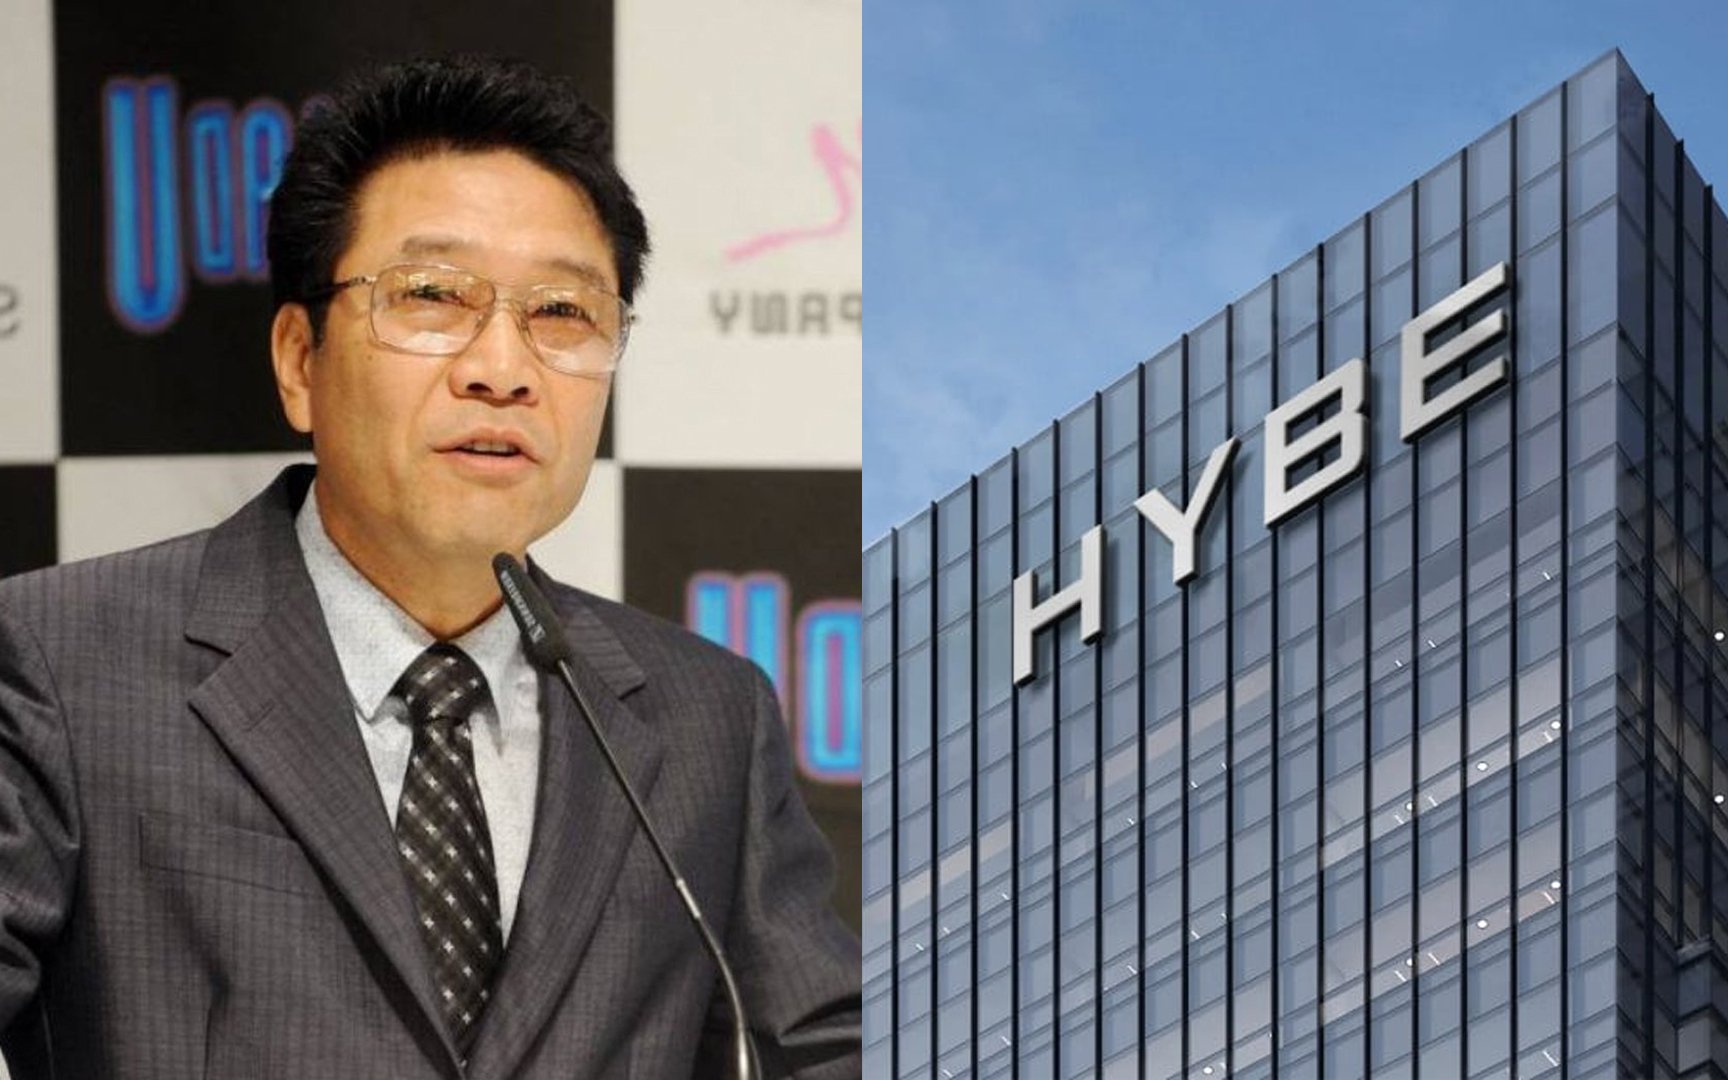 Industry experts are saying HYBE is not a 